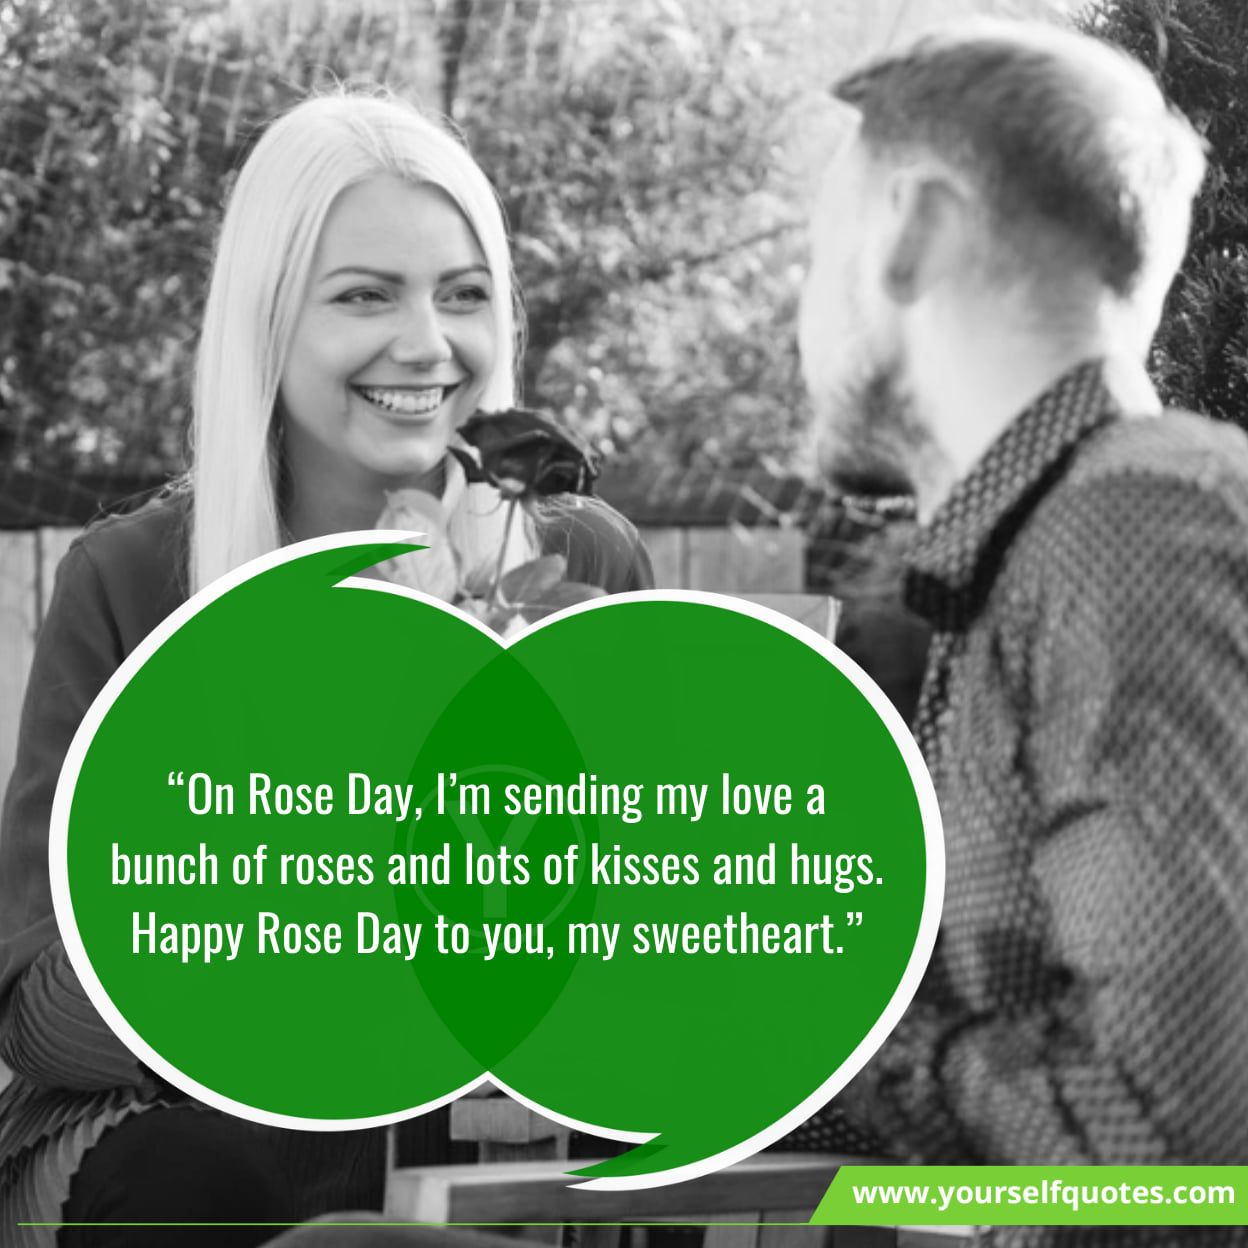 Rose Day Quotes for Boyfriend